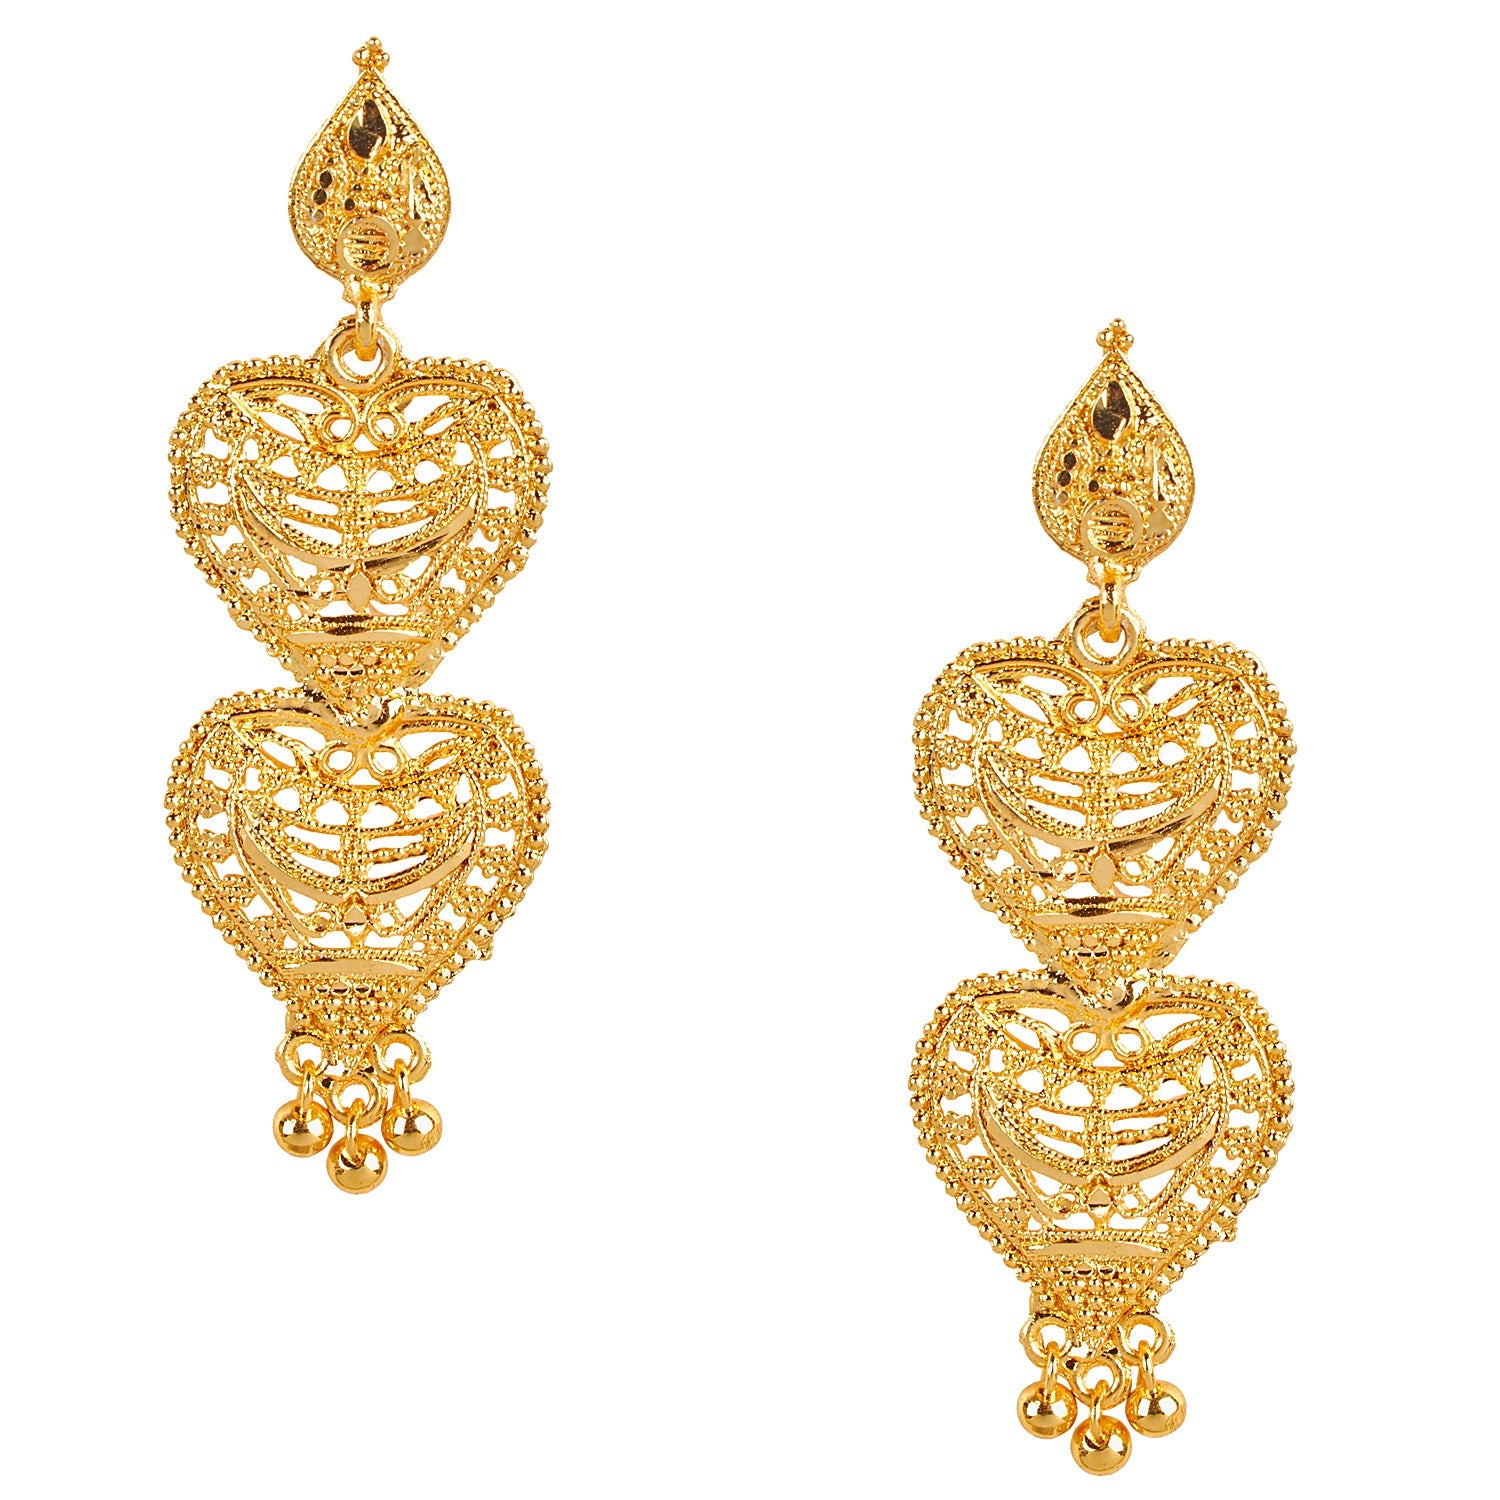 Buy SHARALLE Gold Tone Splendid Chandbali Hoop with Jhumka Earring for  Women One Gram Gold Plated Earrings South Indian Temple Design at Amazon.in